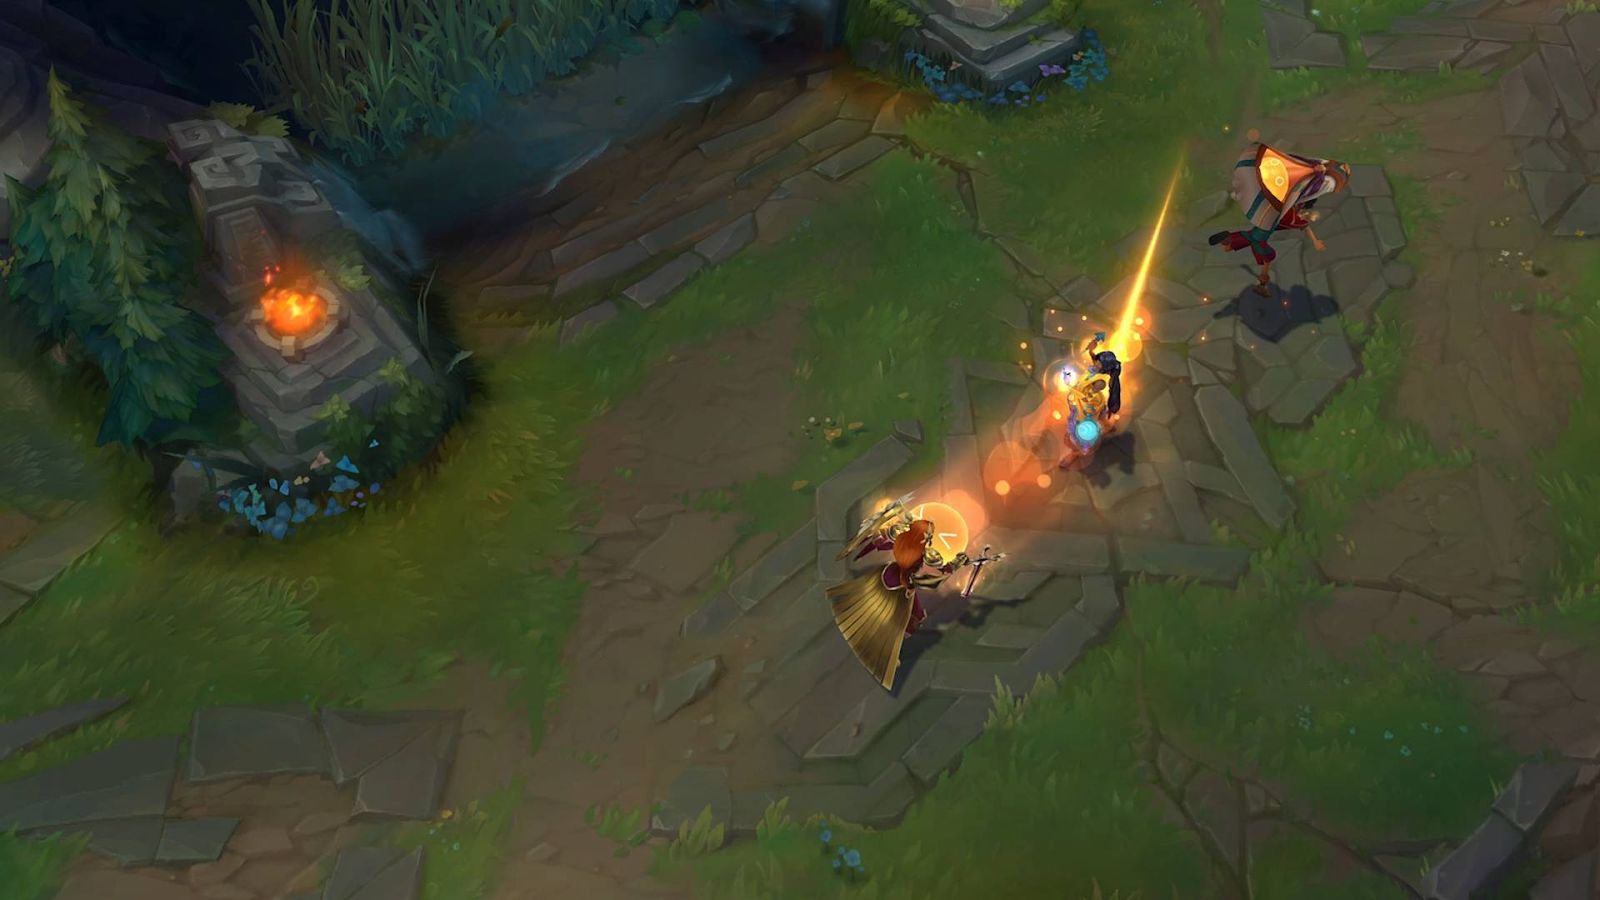 Milio performing the Fired Up move in League of Legends.